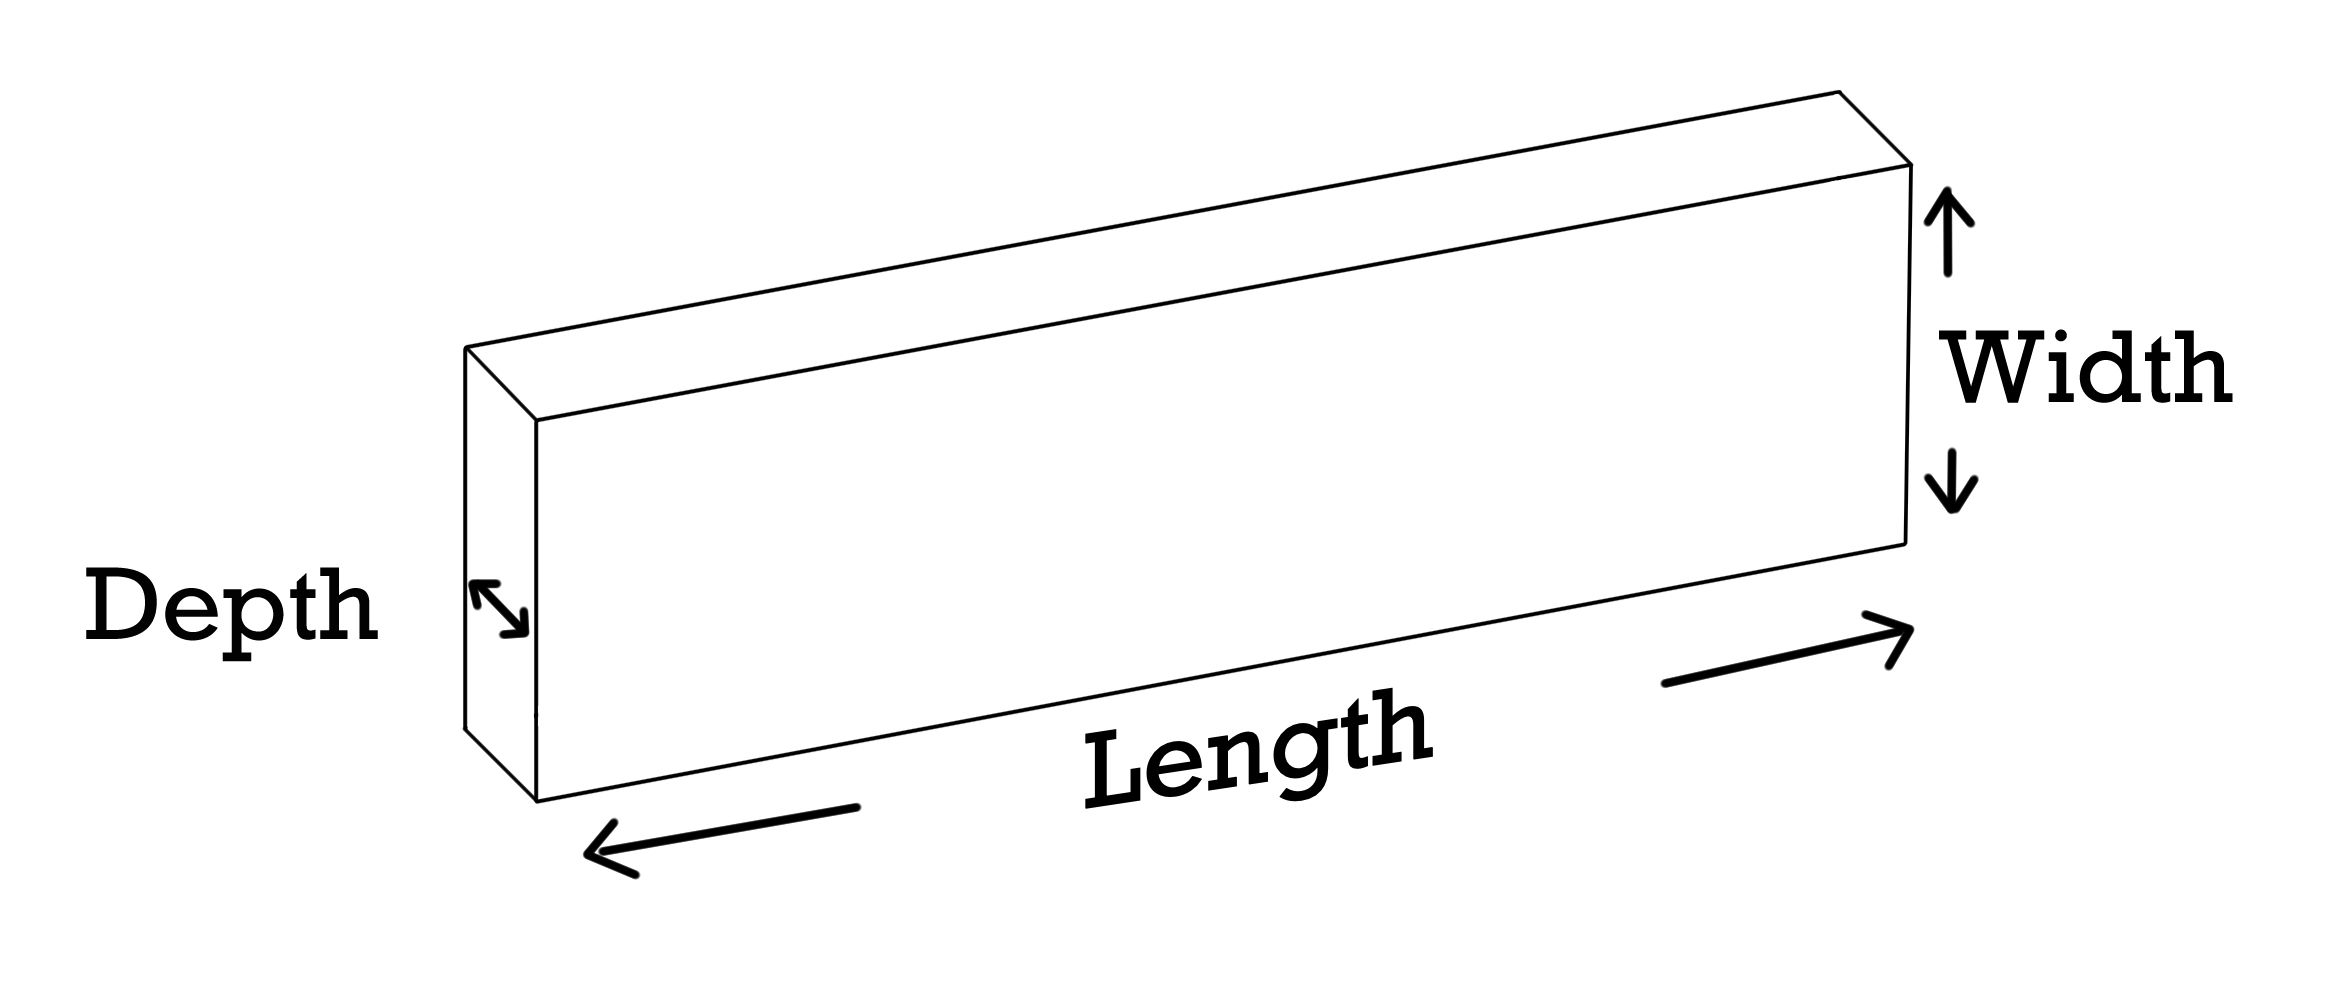 Diagram showing the depth, width and length of wood.